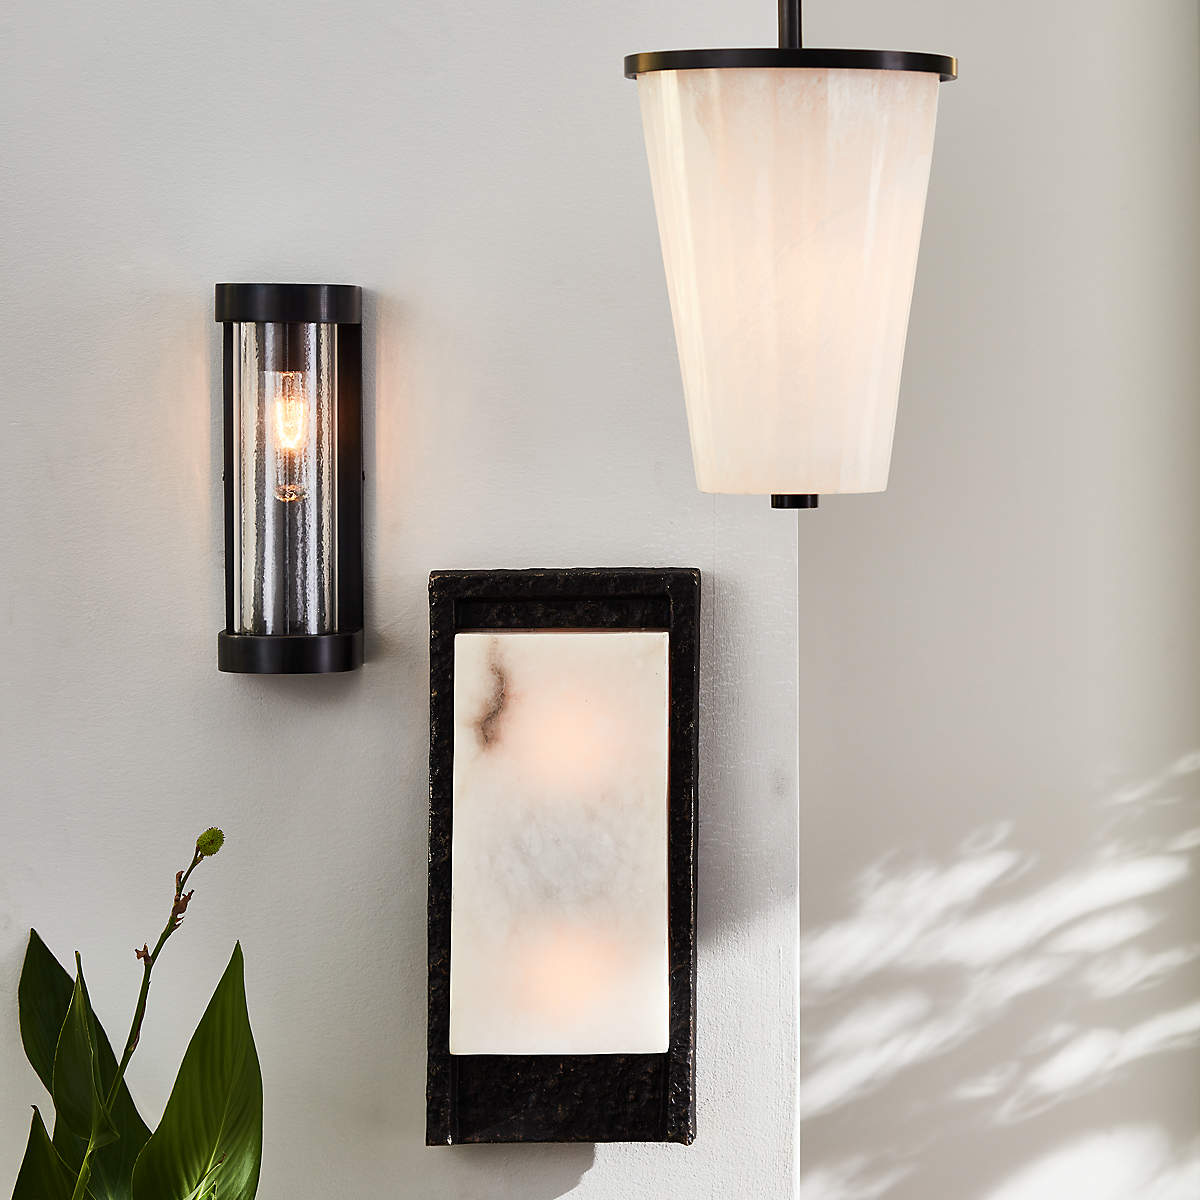 Auric Aluminum and Alabaster Wall Sconce Light